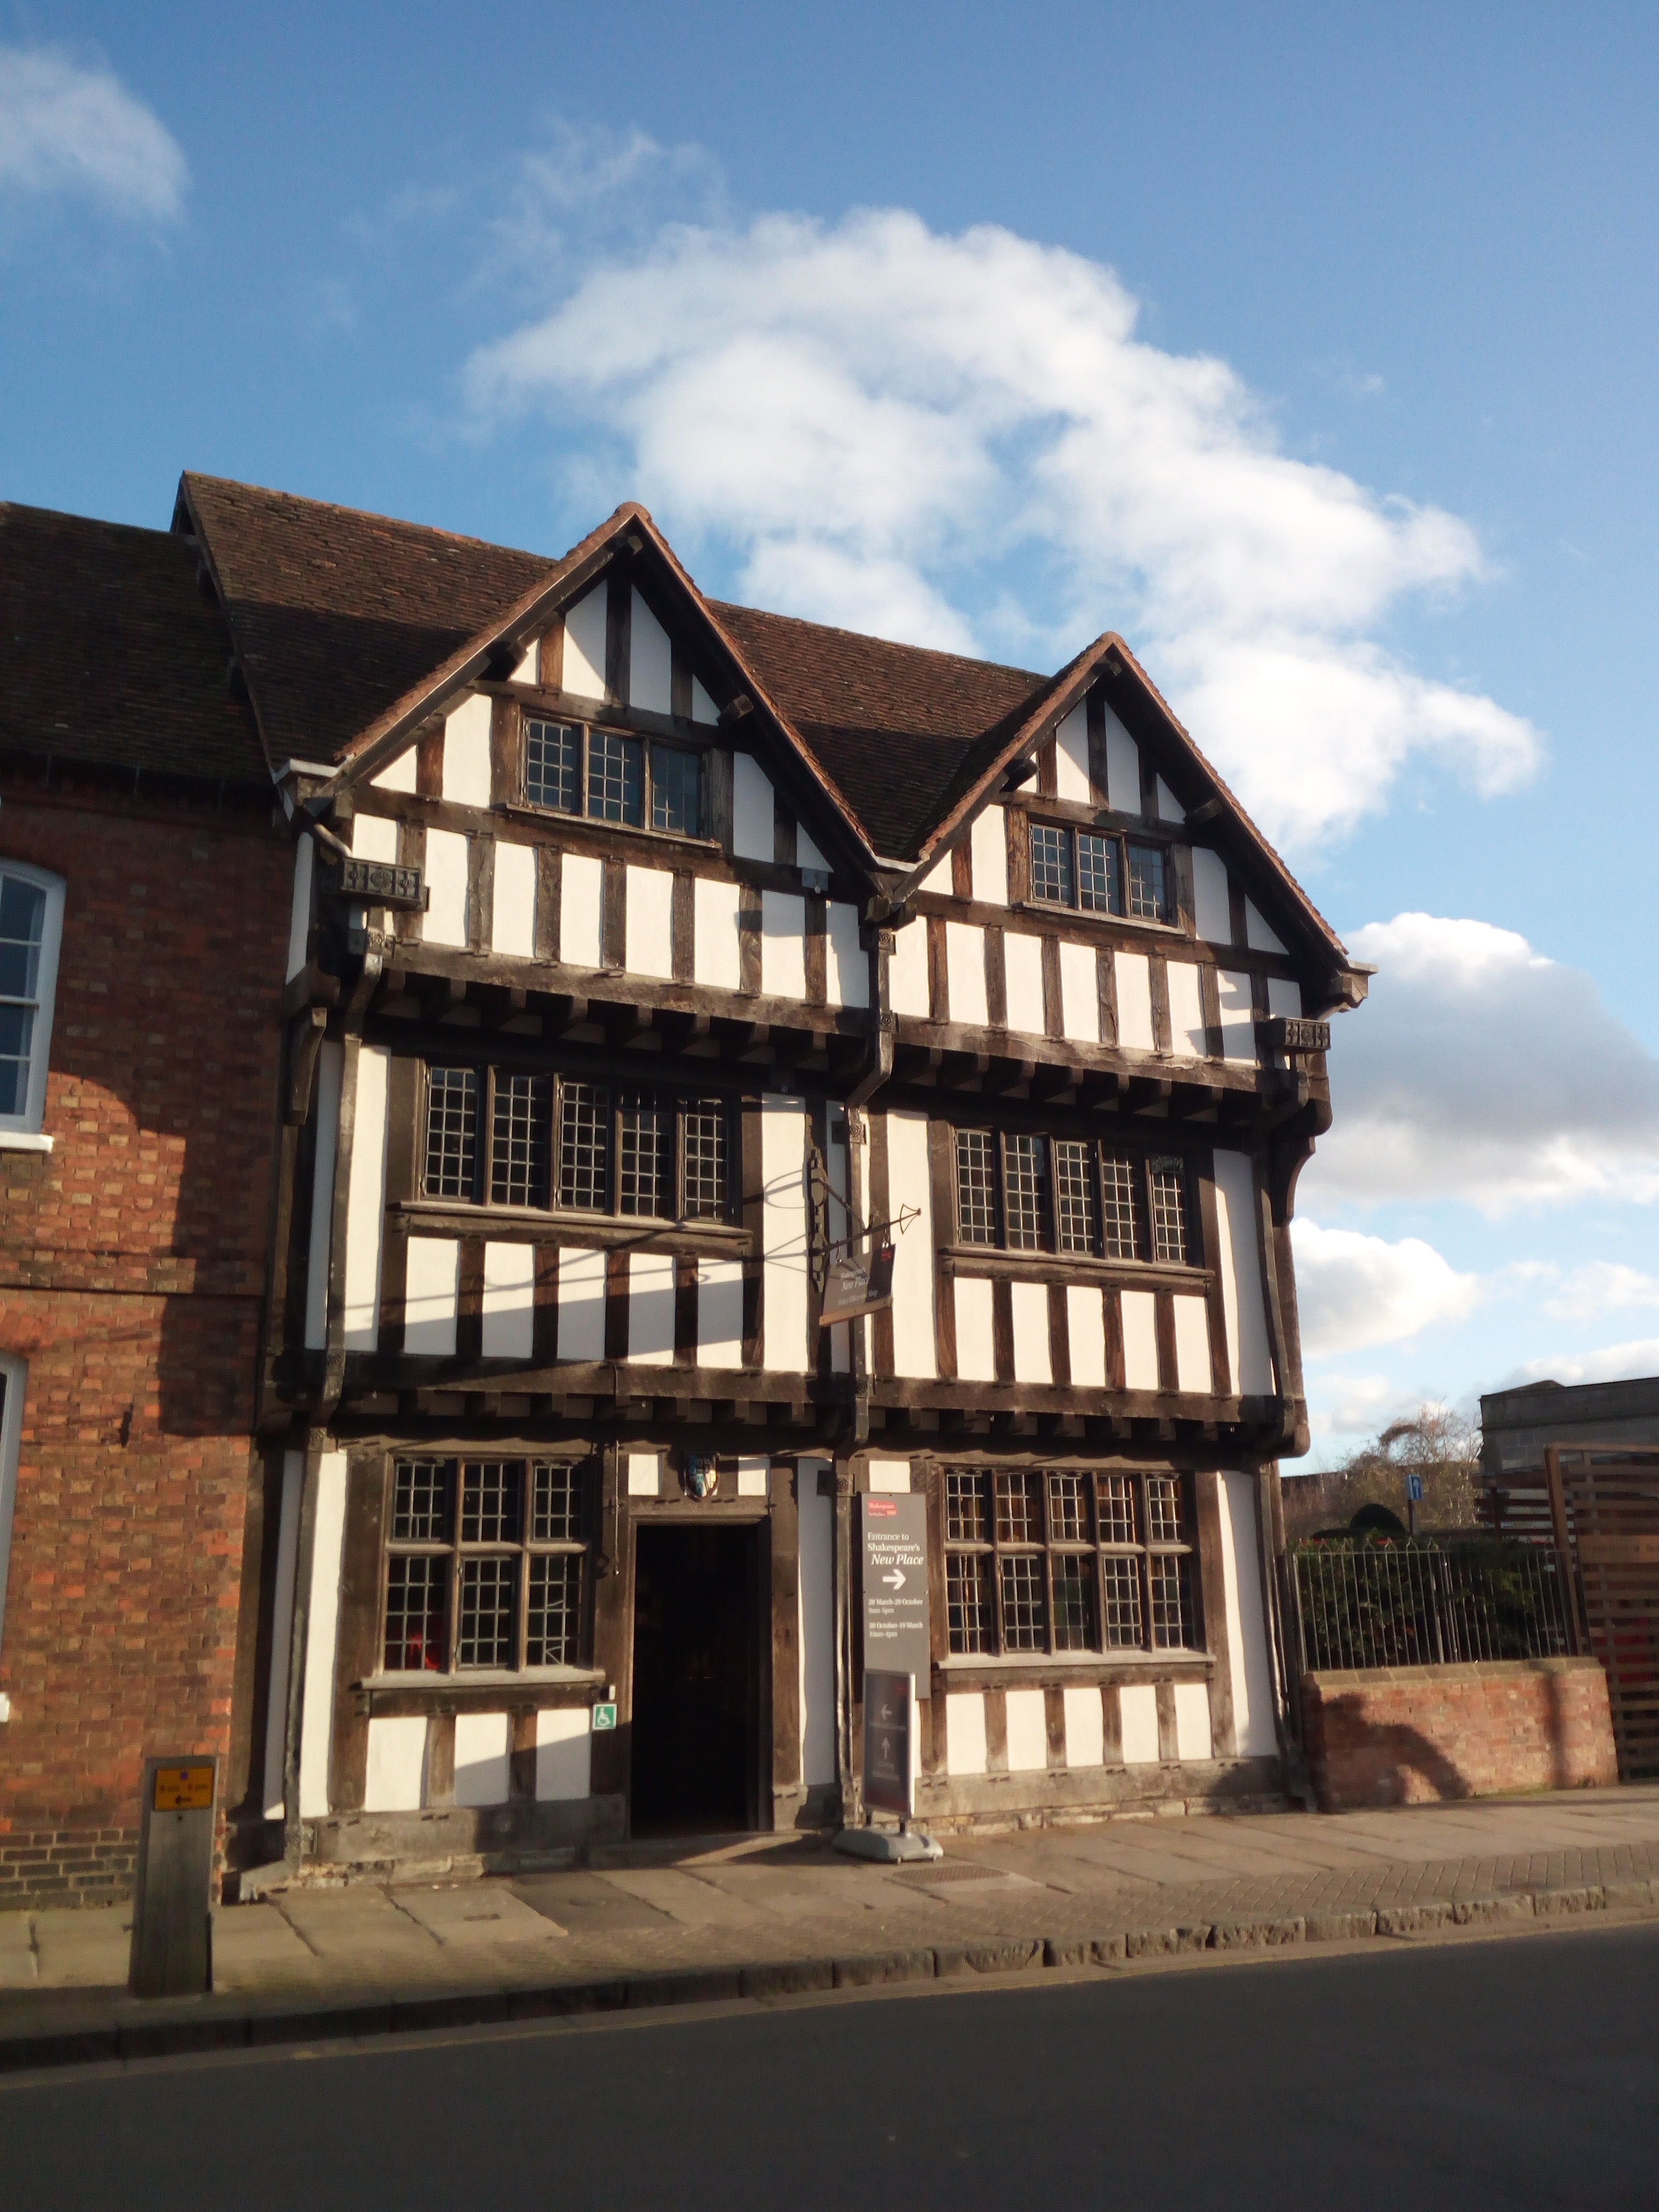 William Shakespeare's New Place - Stratford-upon-Avon